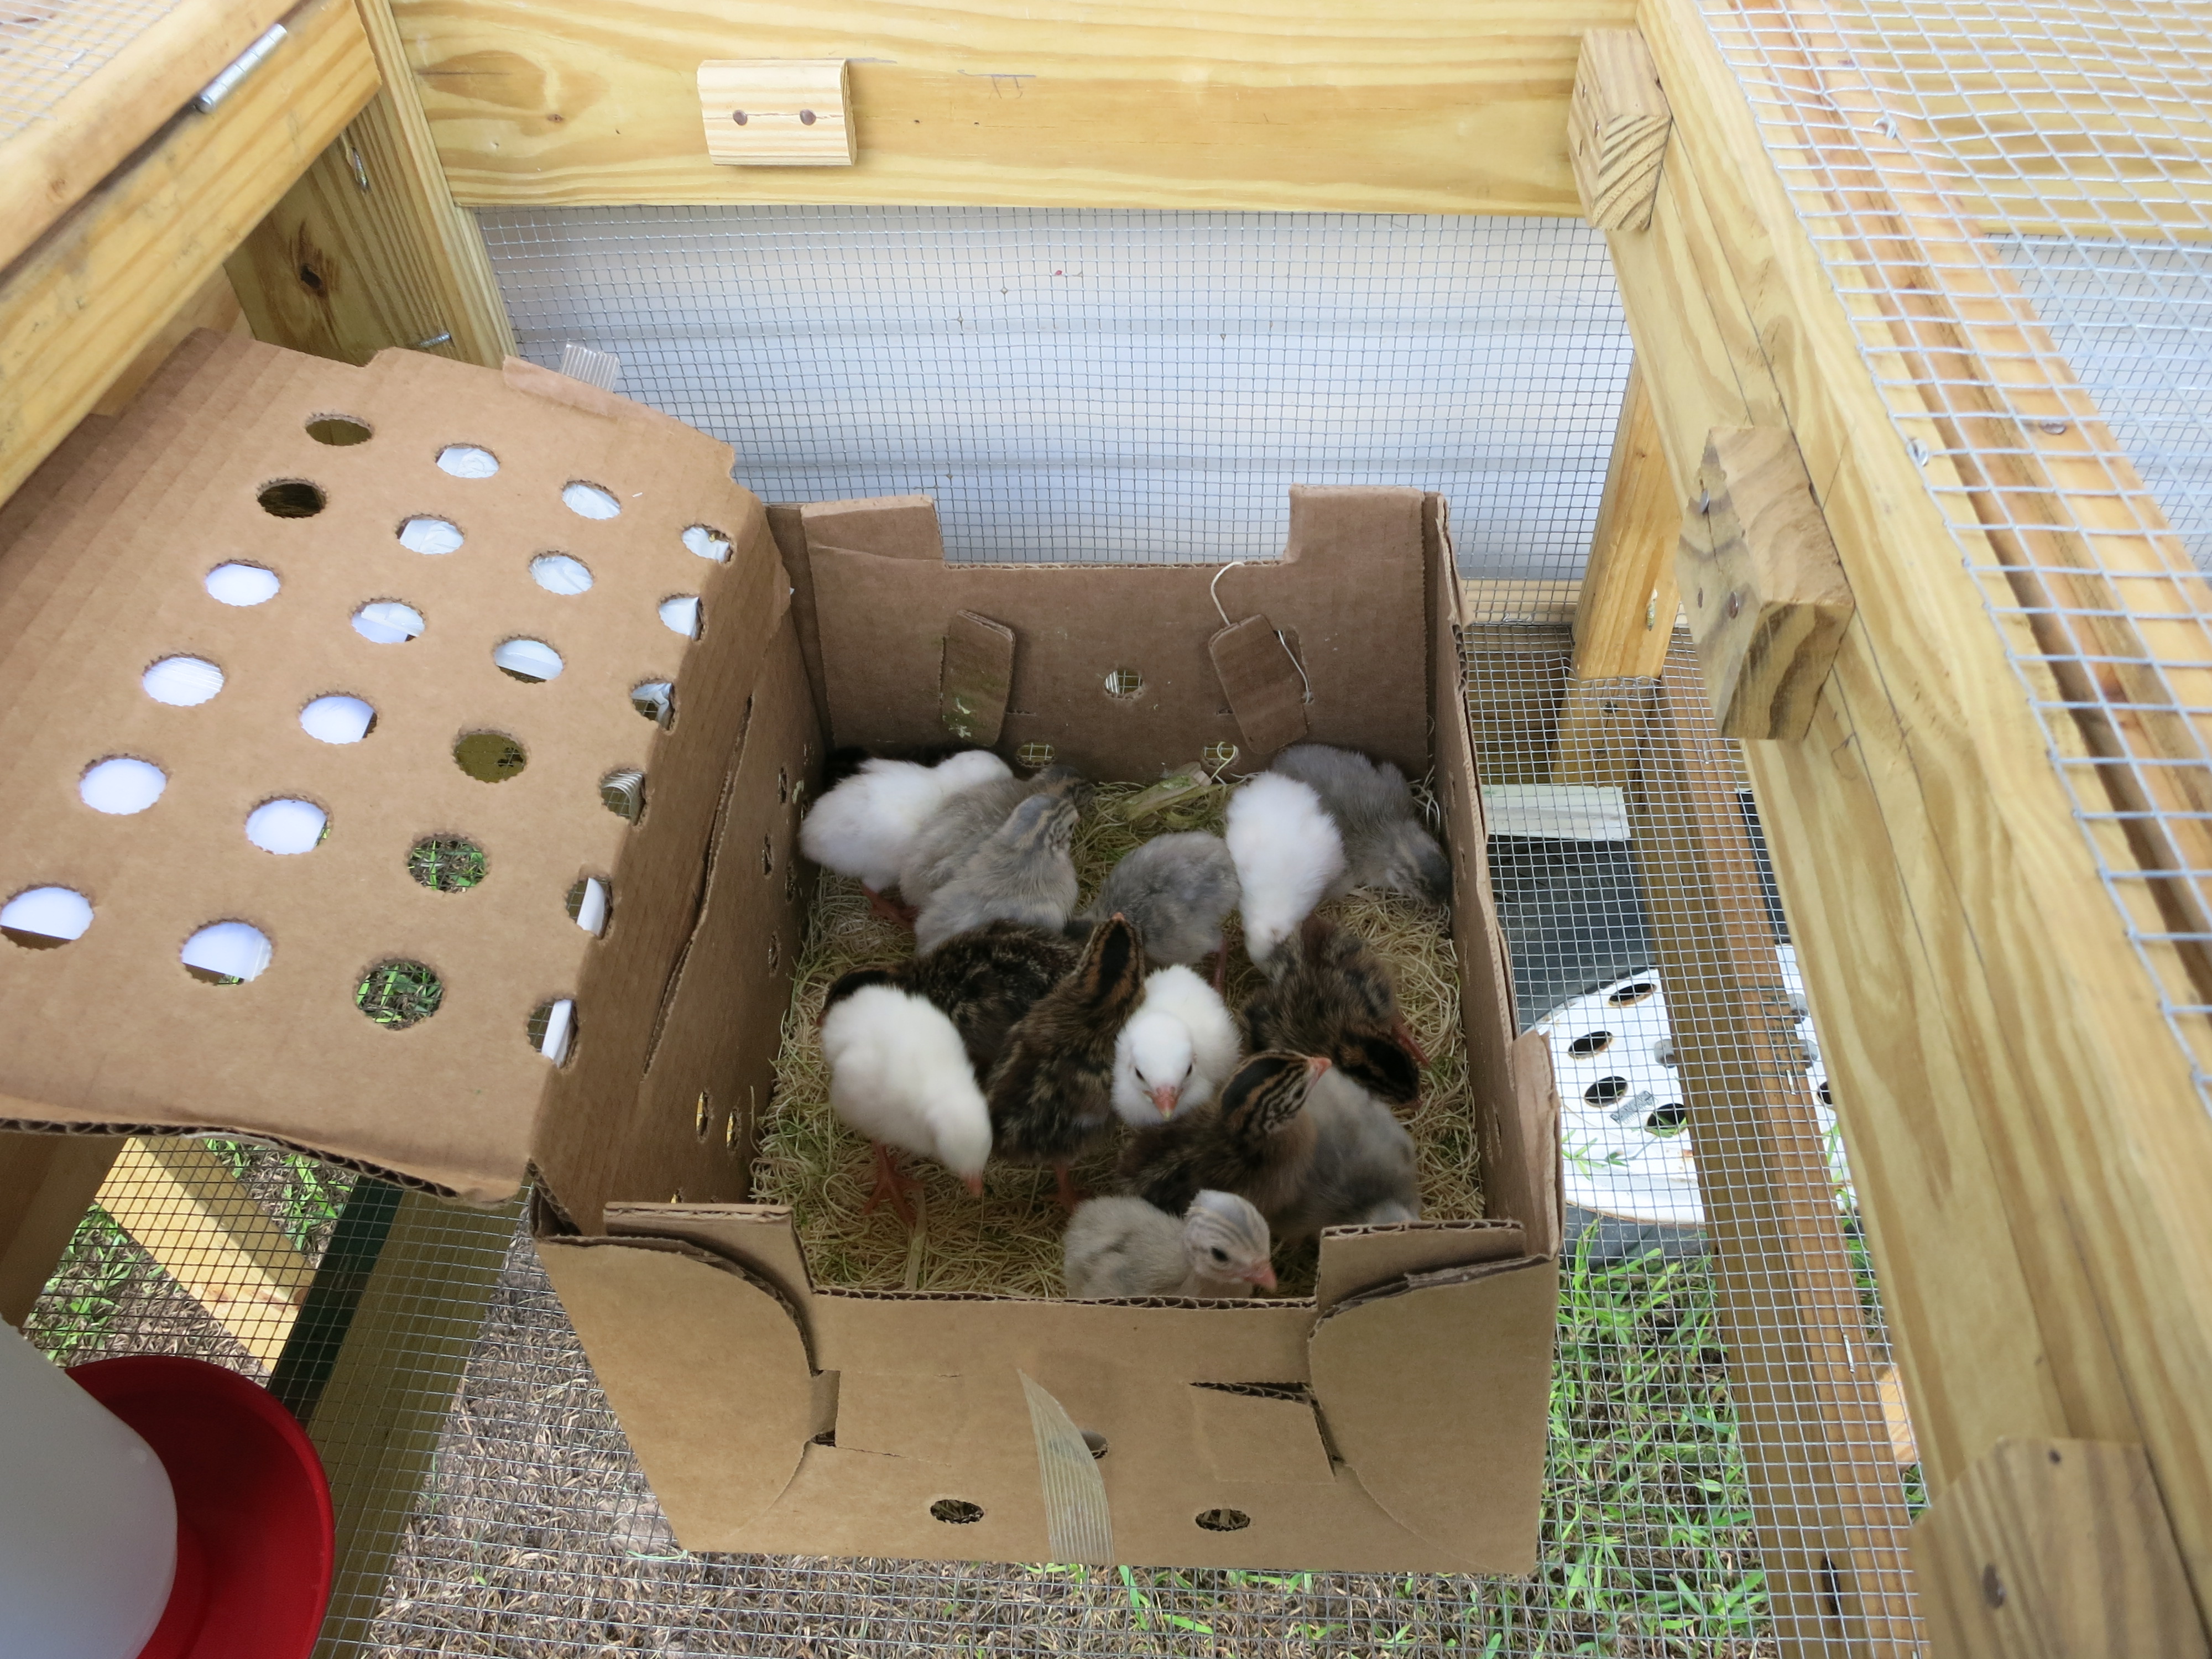 Just received: Baby Guineas: 7/17/15